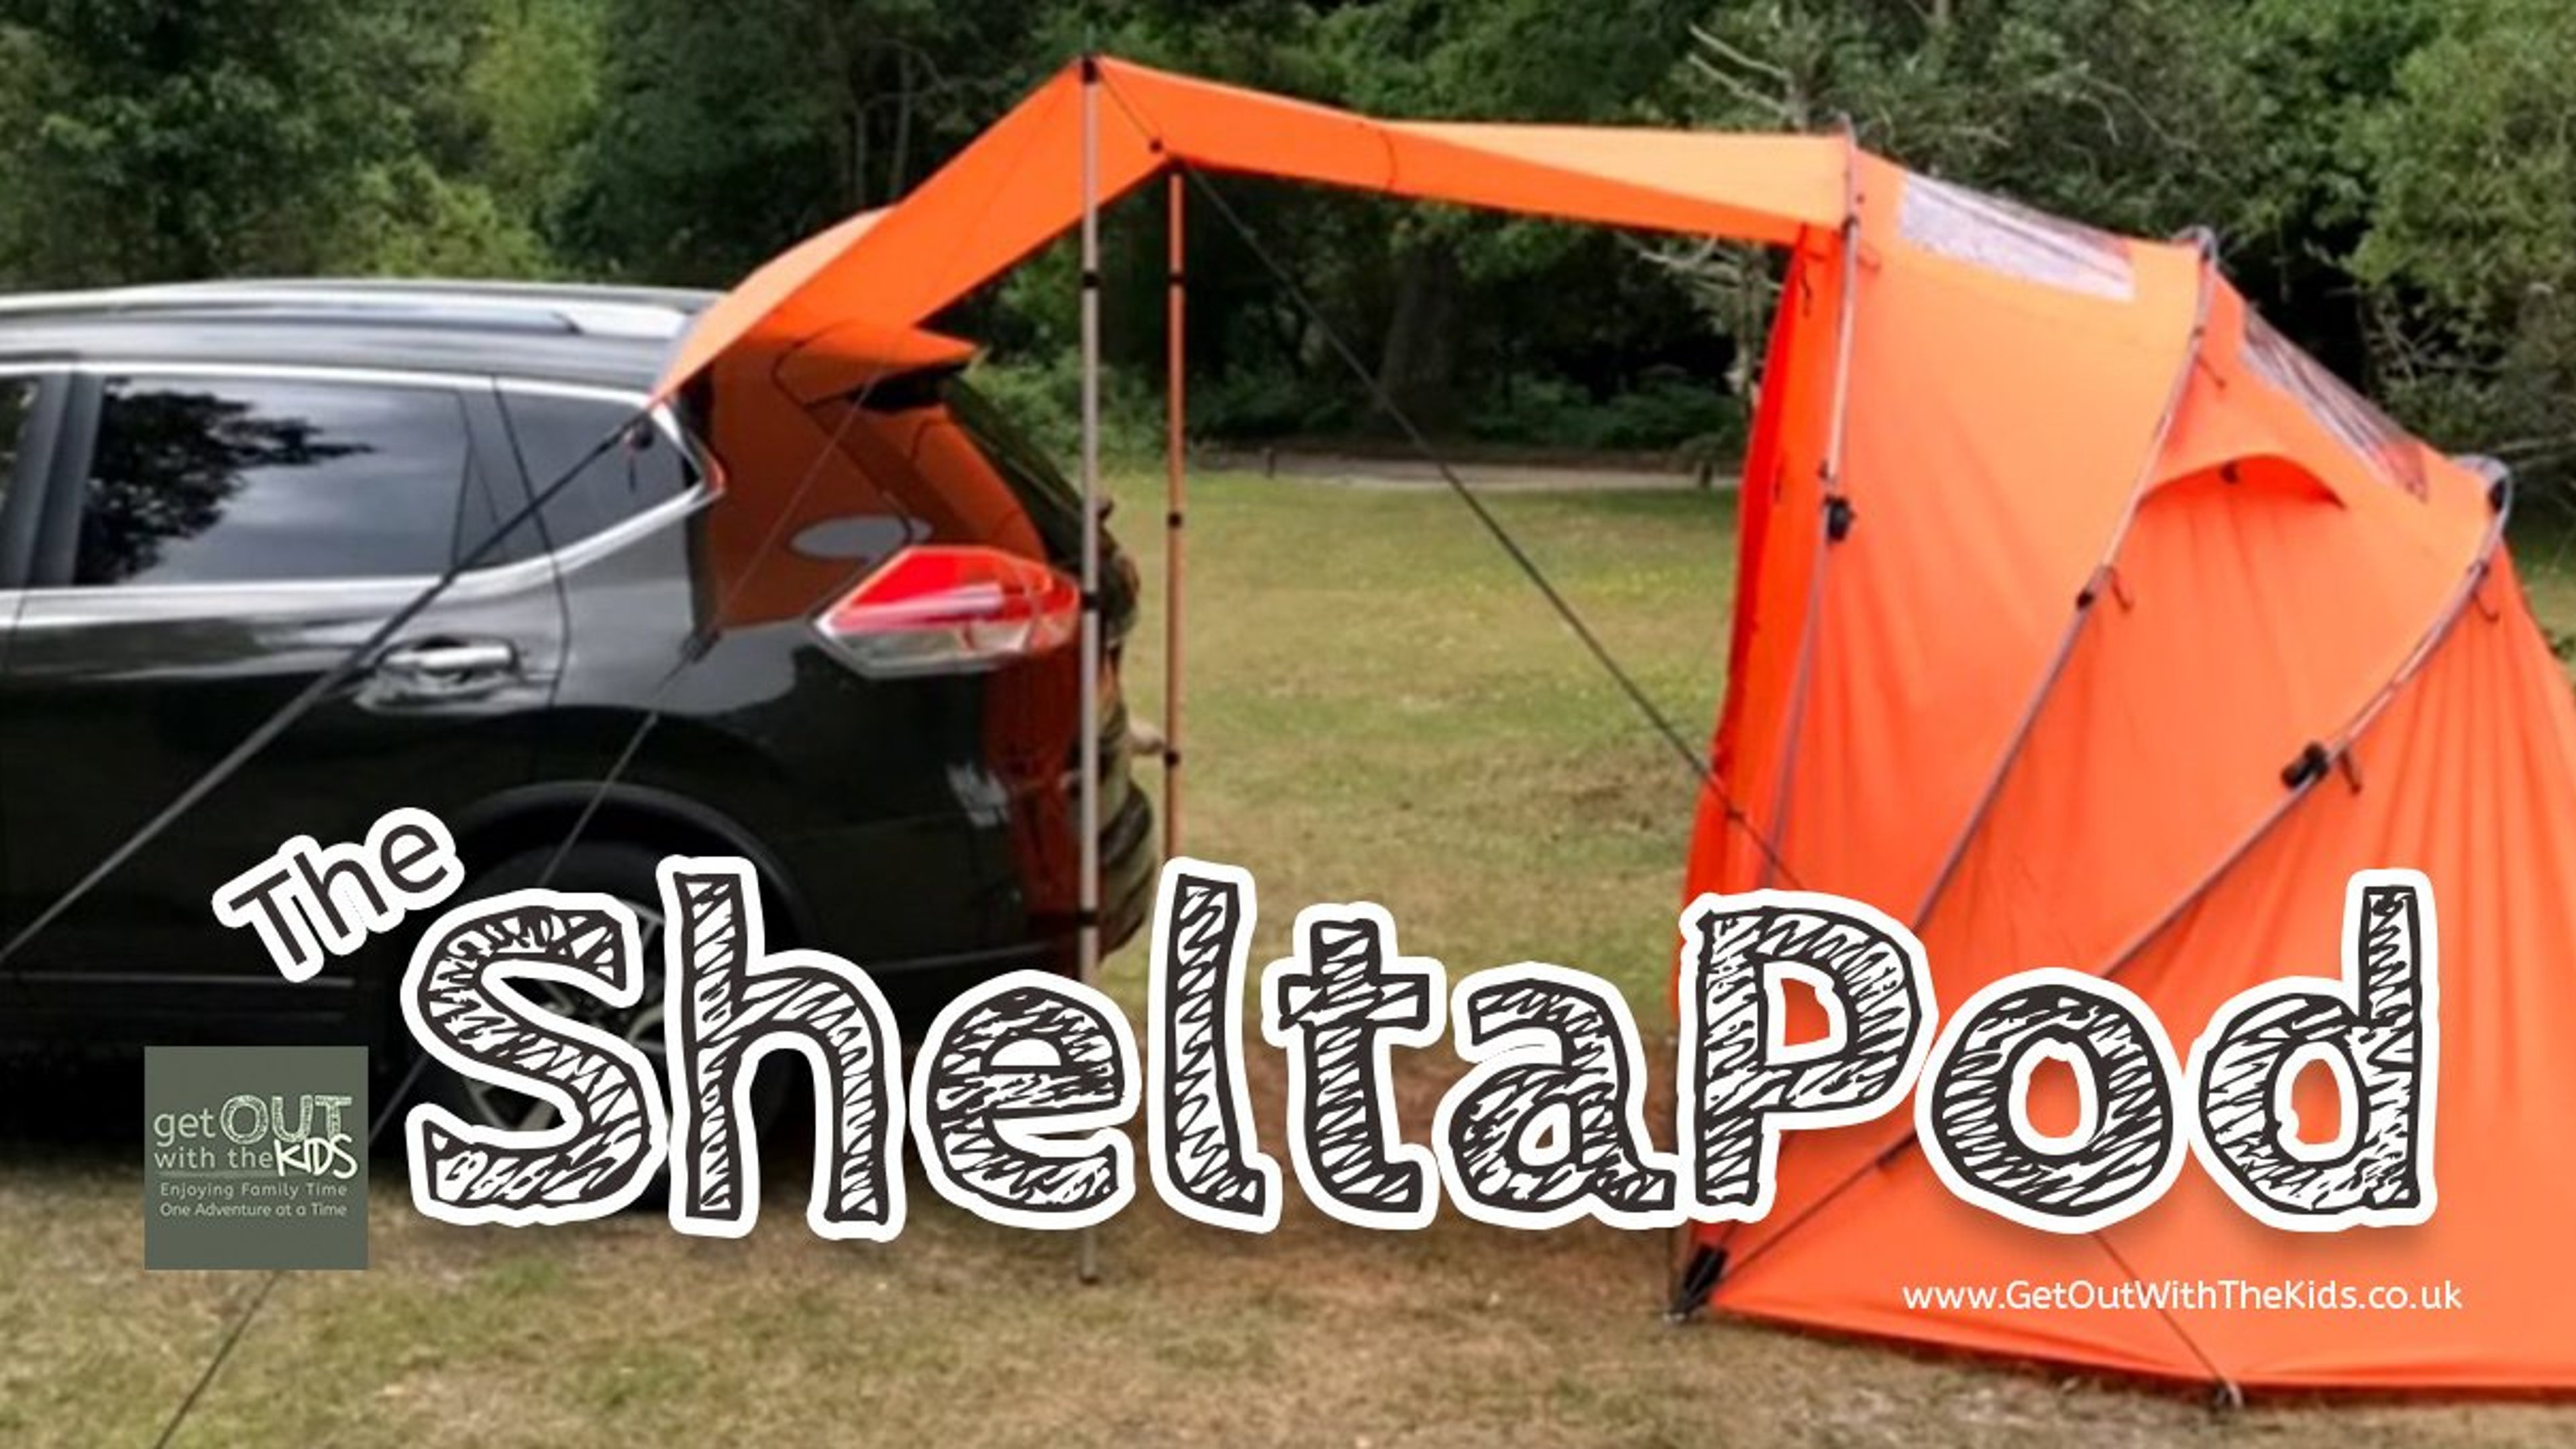 The SheltaPod attached to the rear of a car